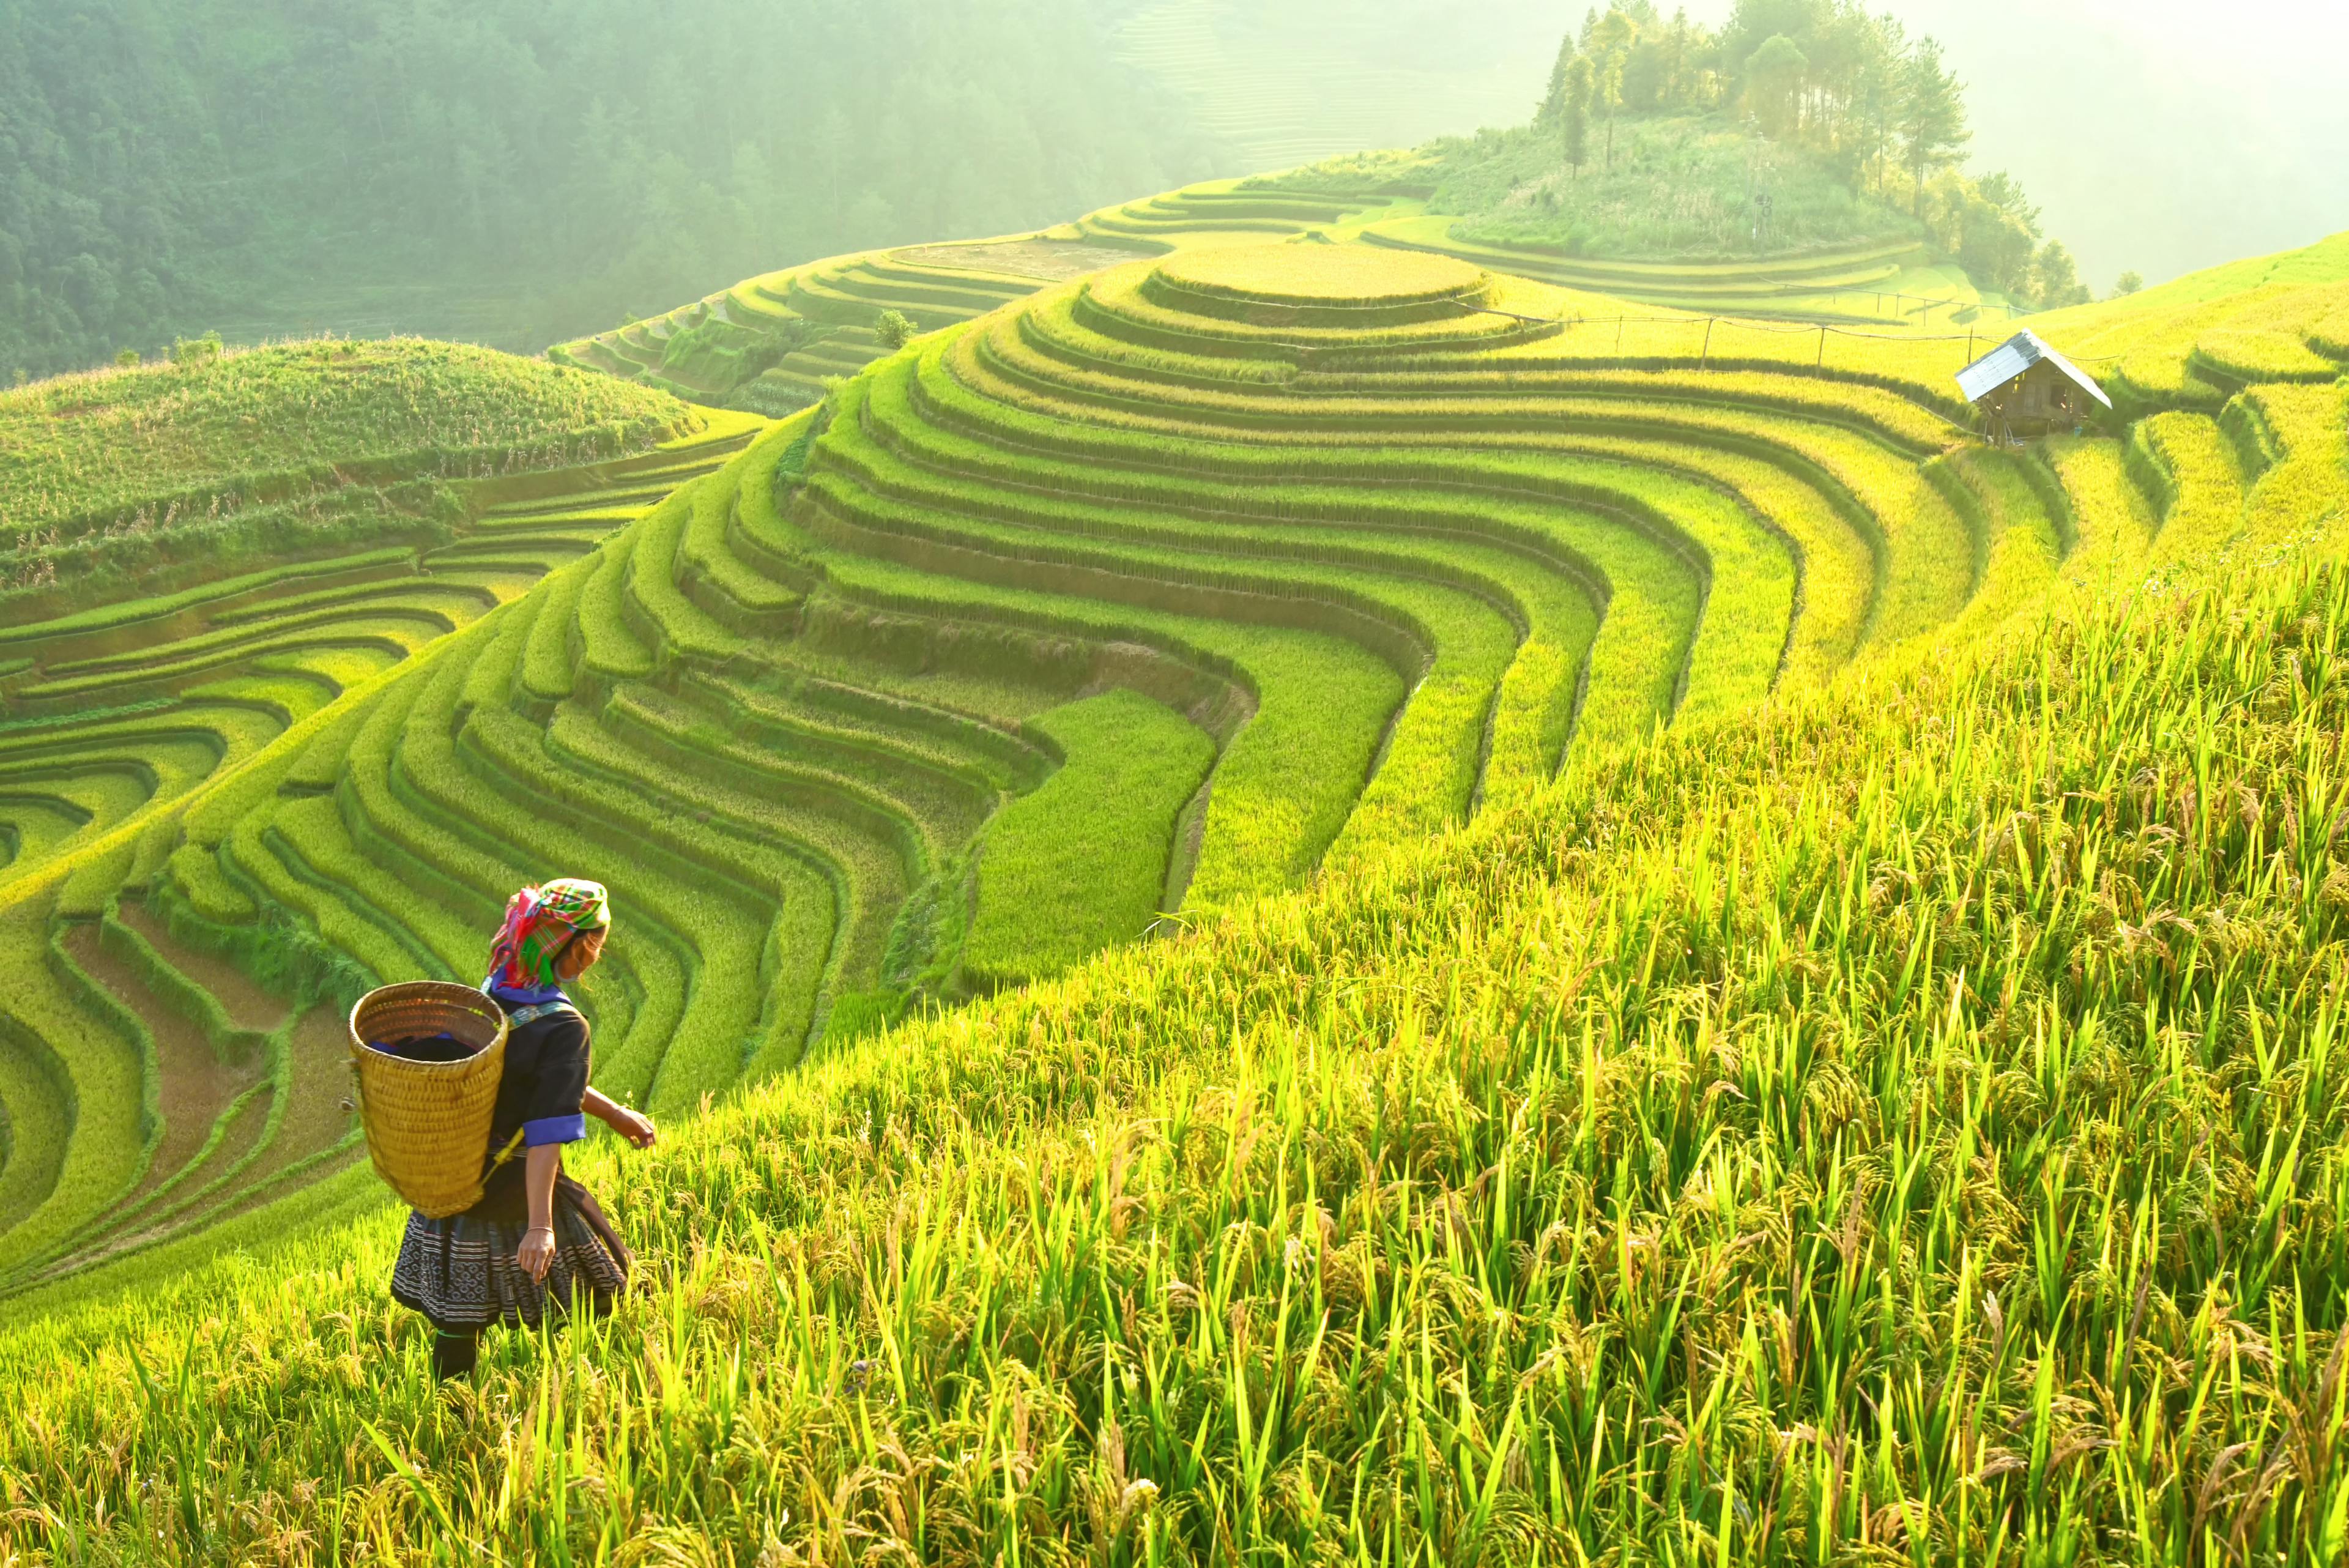 A woman with a basket standing in a landscape of tiered rice fields